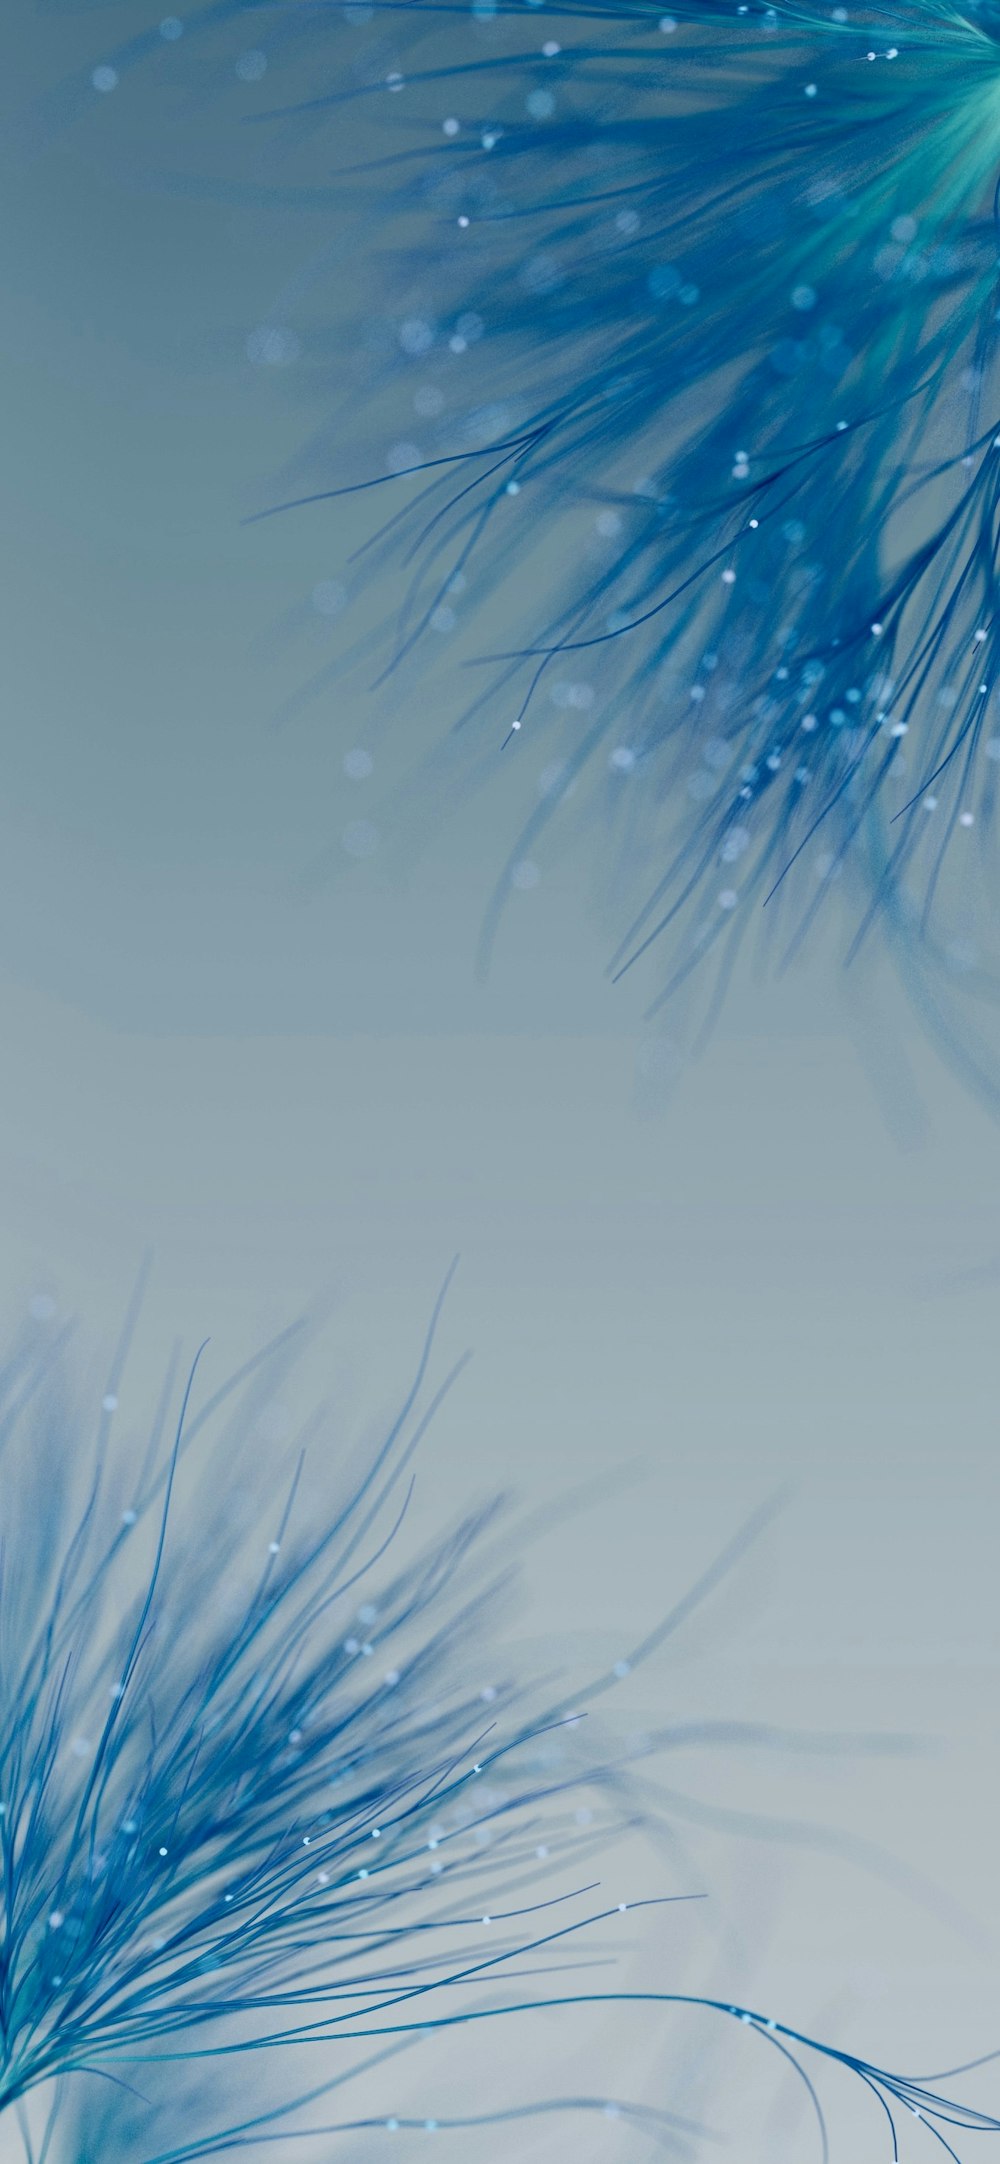 a close up of blue feathers on a white background